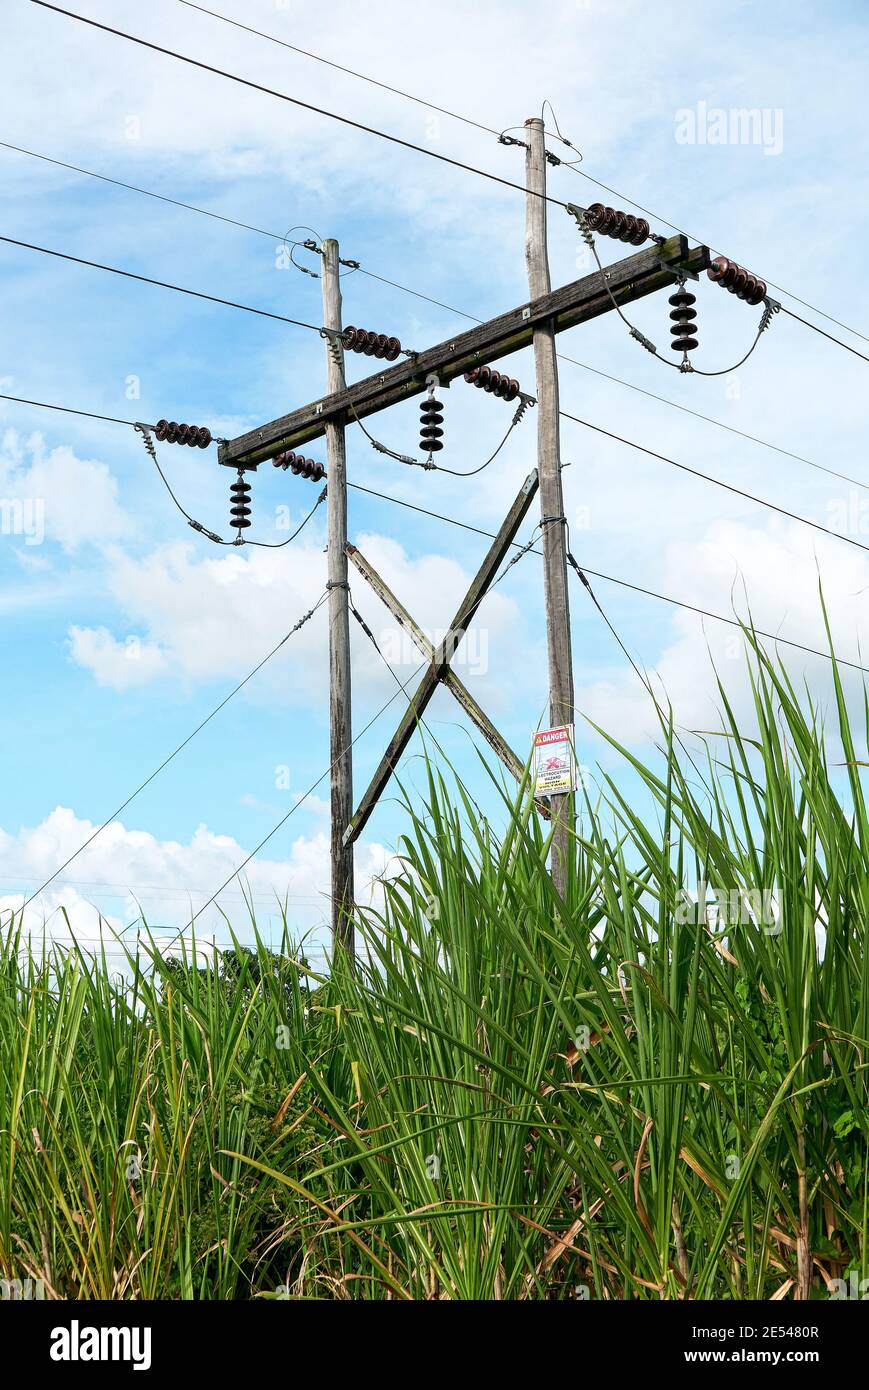 Low-angle detail abstract view of electric power line posts placed in a sugar cane field against the blue sky, Philippines, Asia Stock Photo